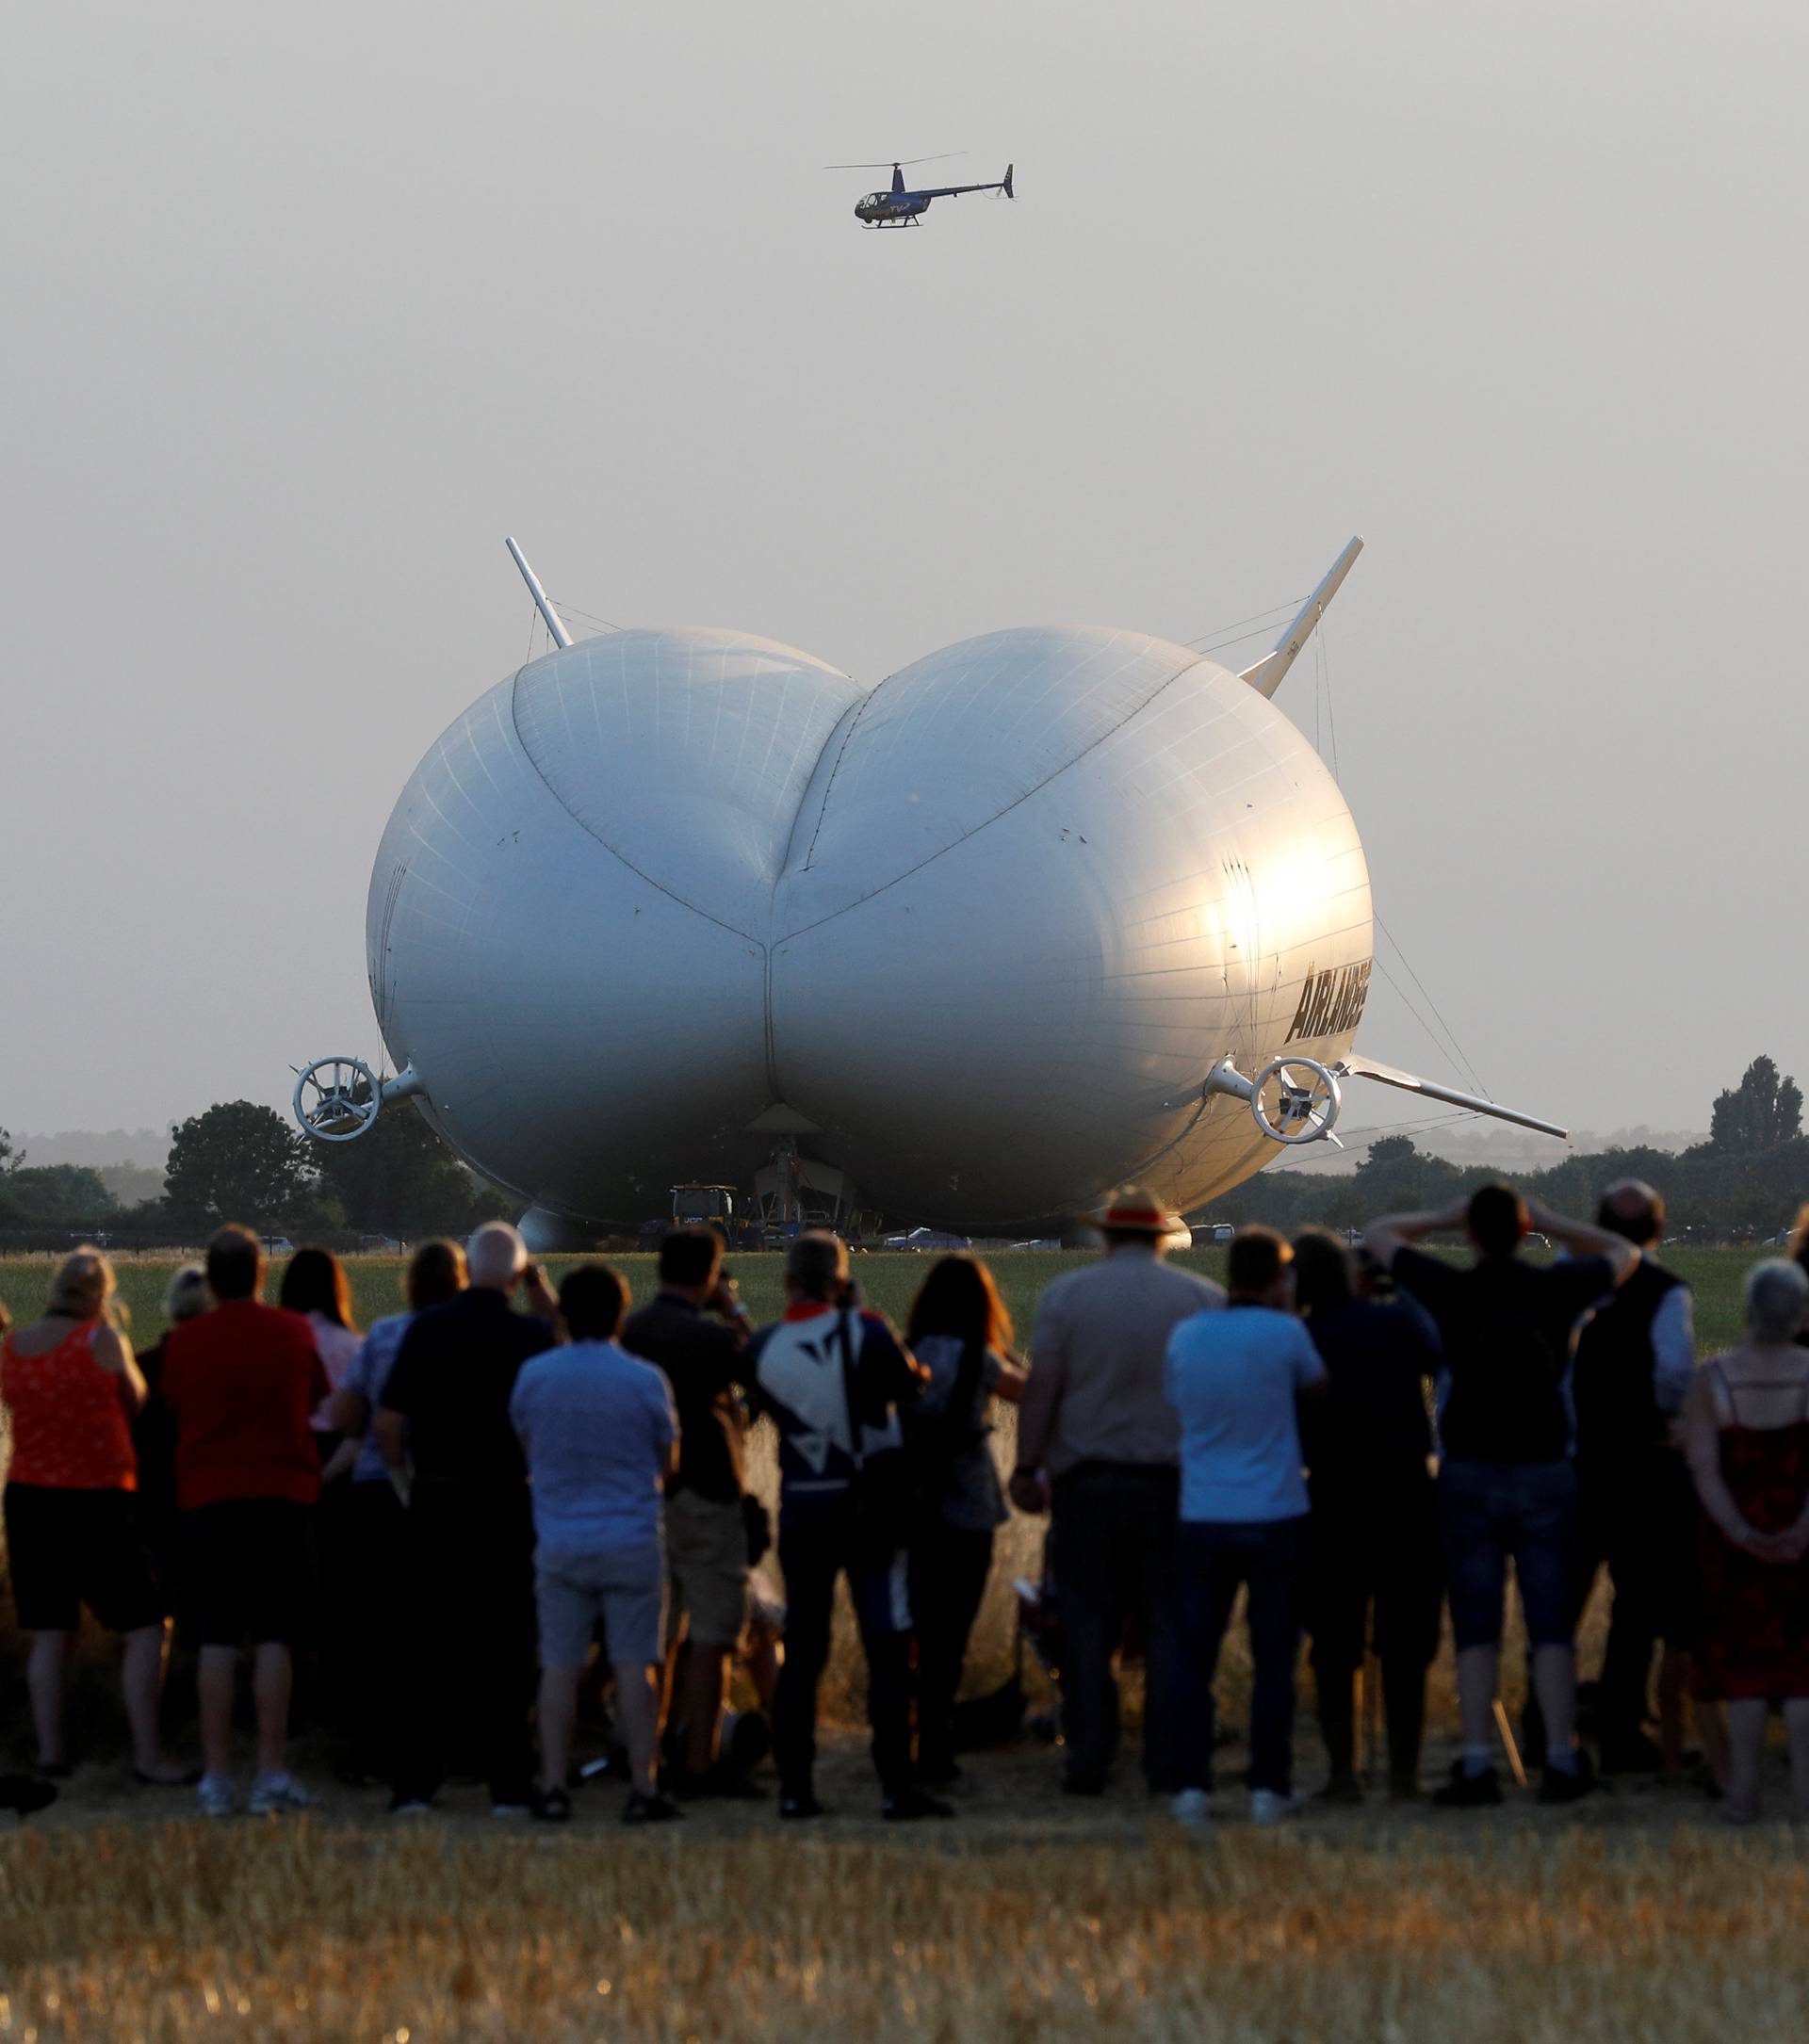 A helicopter flies over the Airlander 10 hybrid airship before its maiden flight at Cardington Airfield in Britain